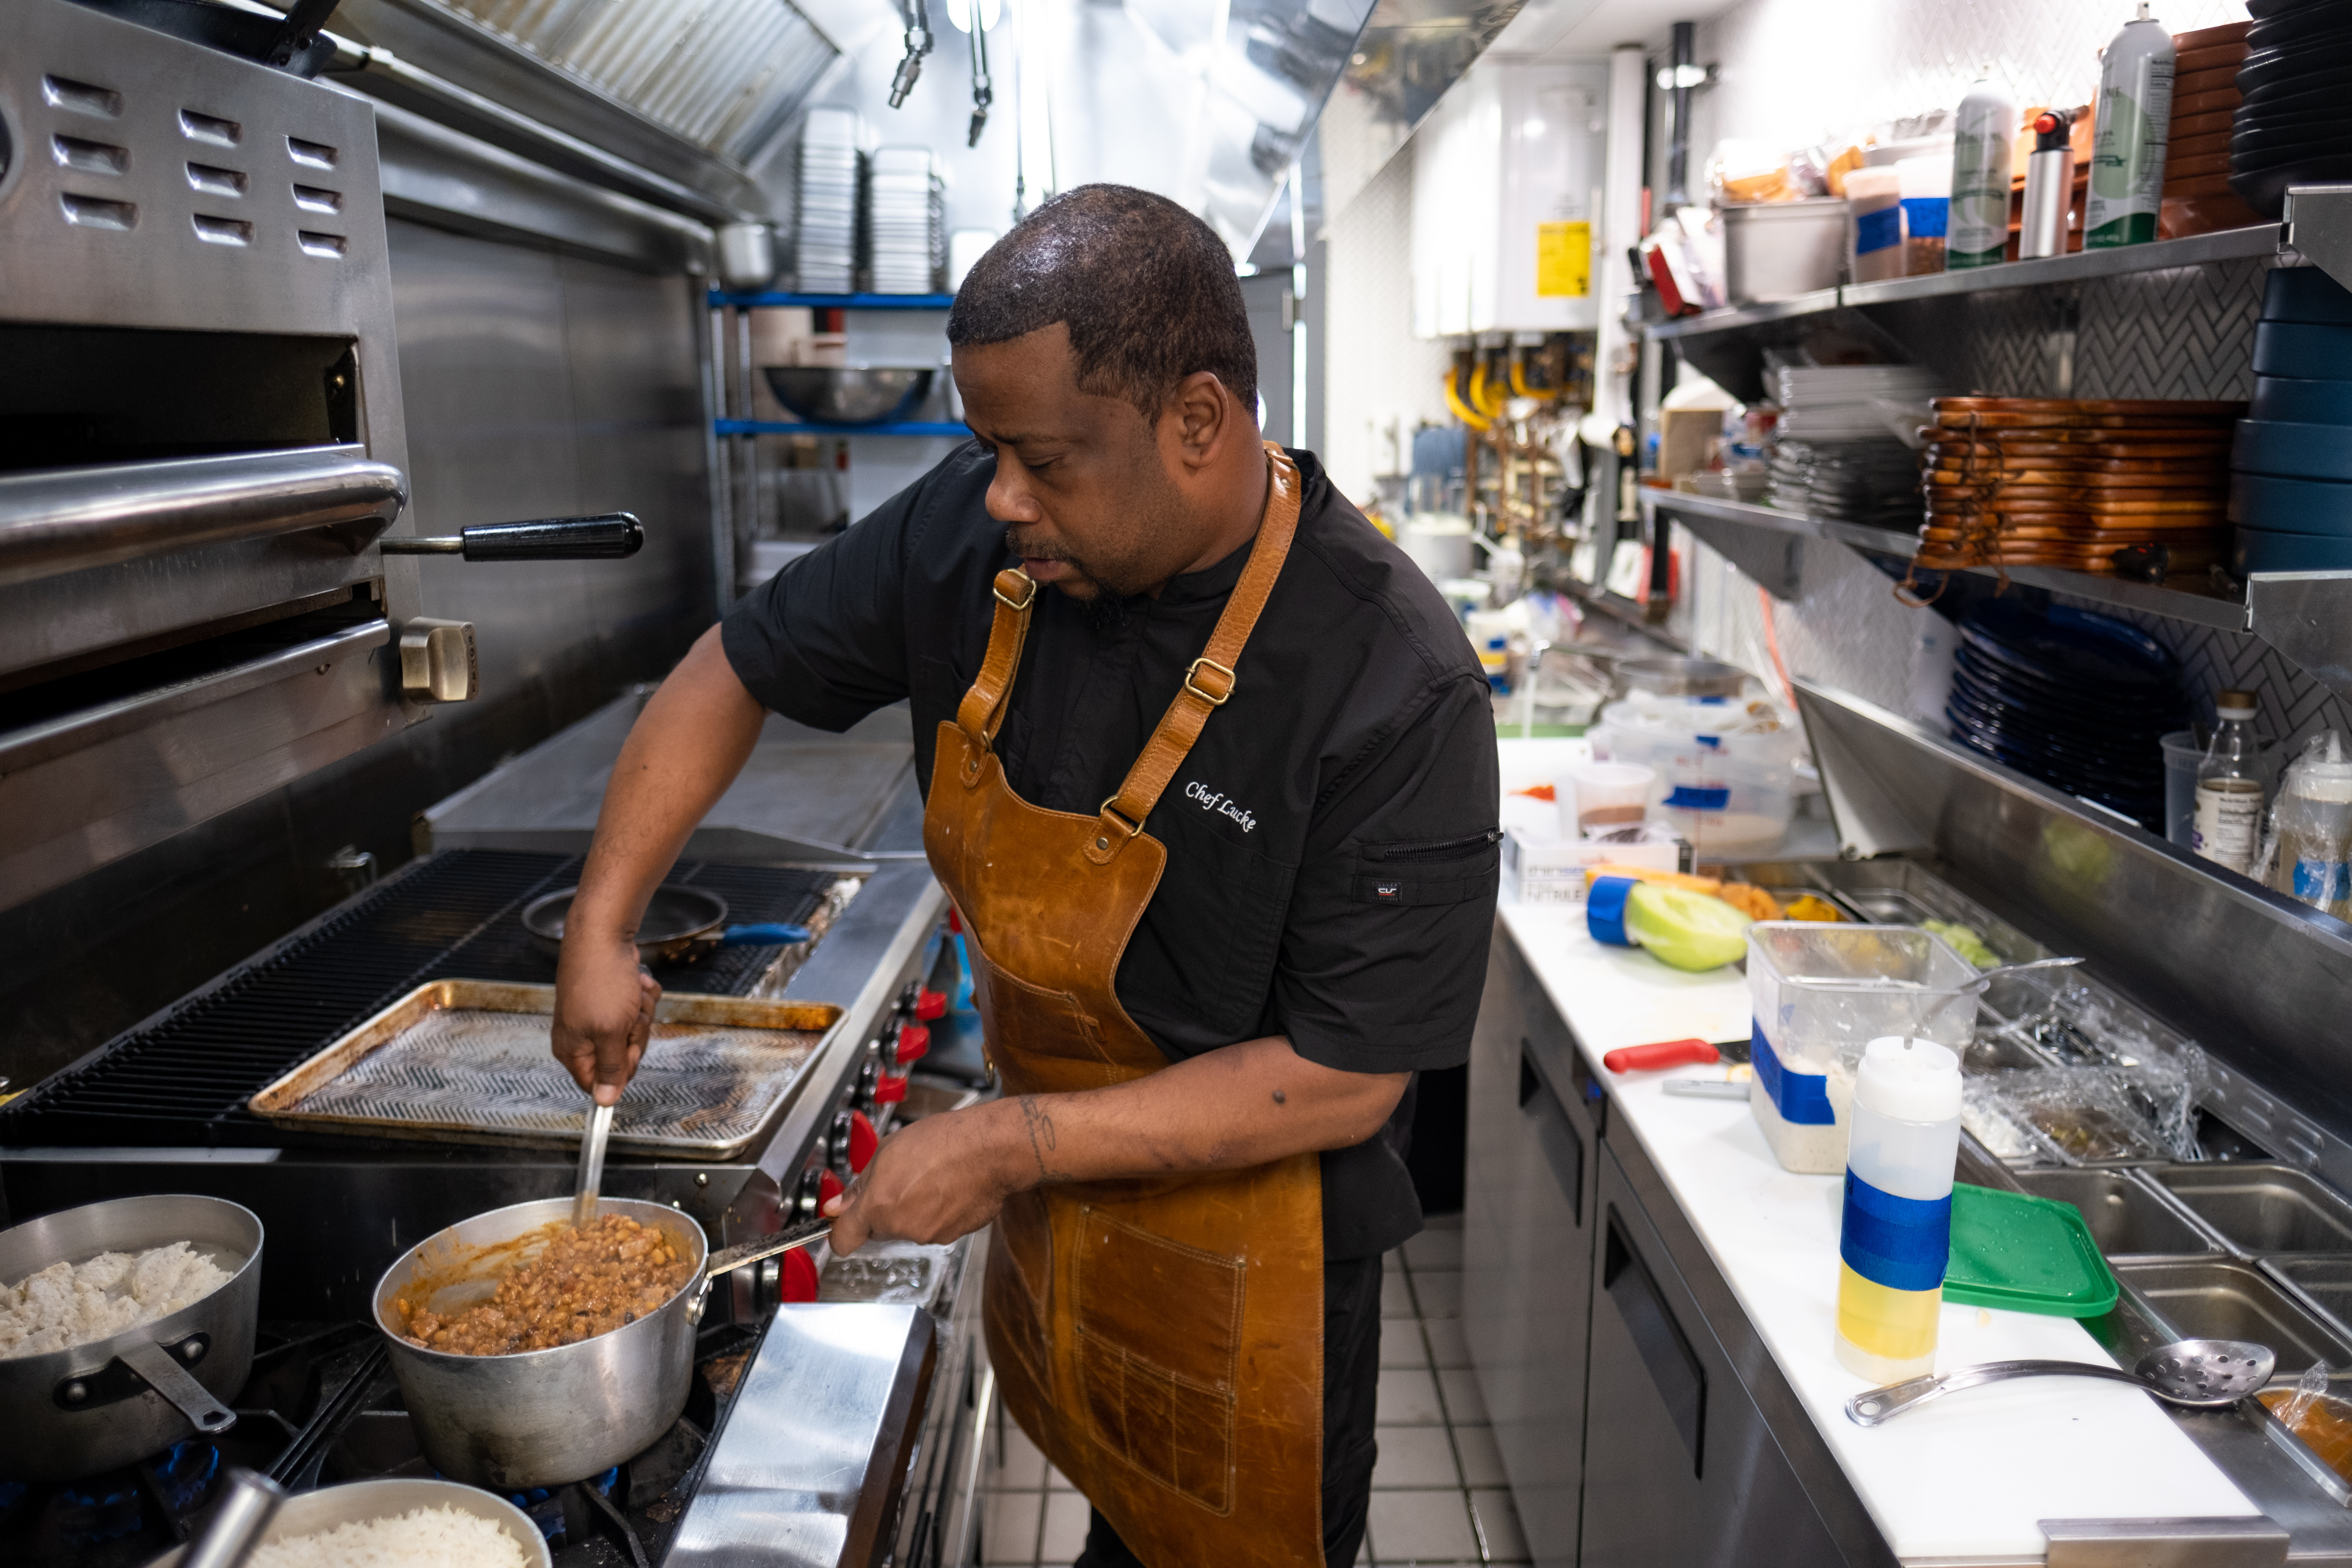 Executive Chef Christian “Lucke” Bell stirs beans for huevos rancheros in the kitchen of Oreatha’s at the Point. Ben Gray for the Atlanta Journal-Constitution